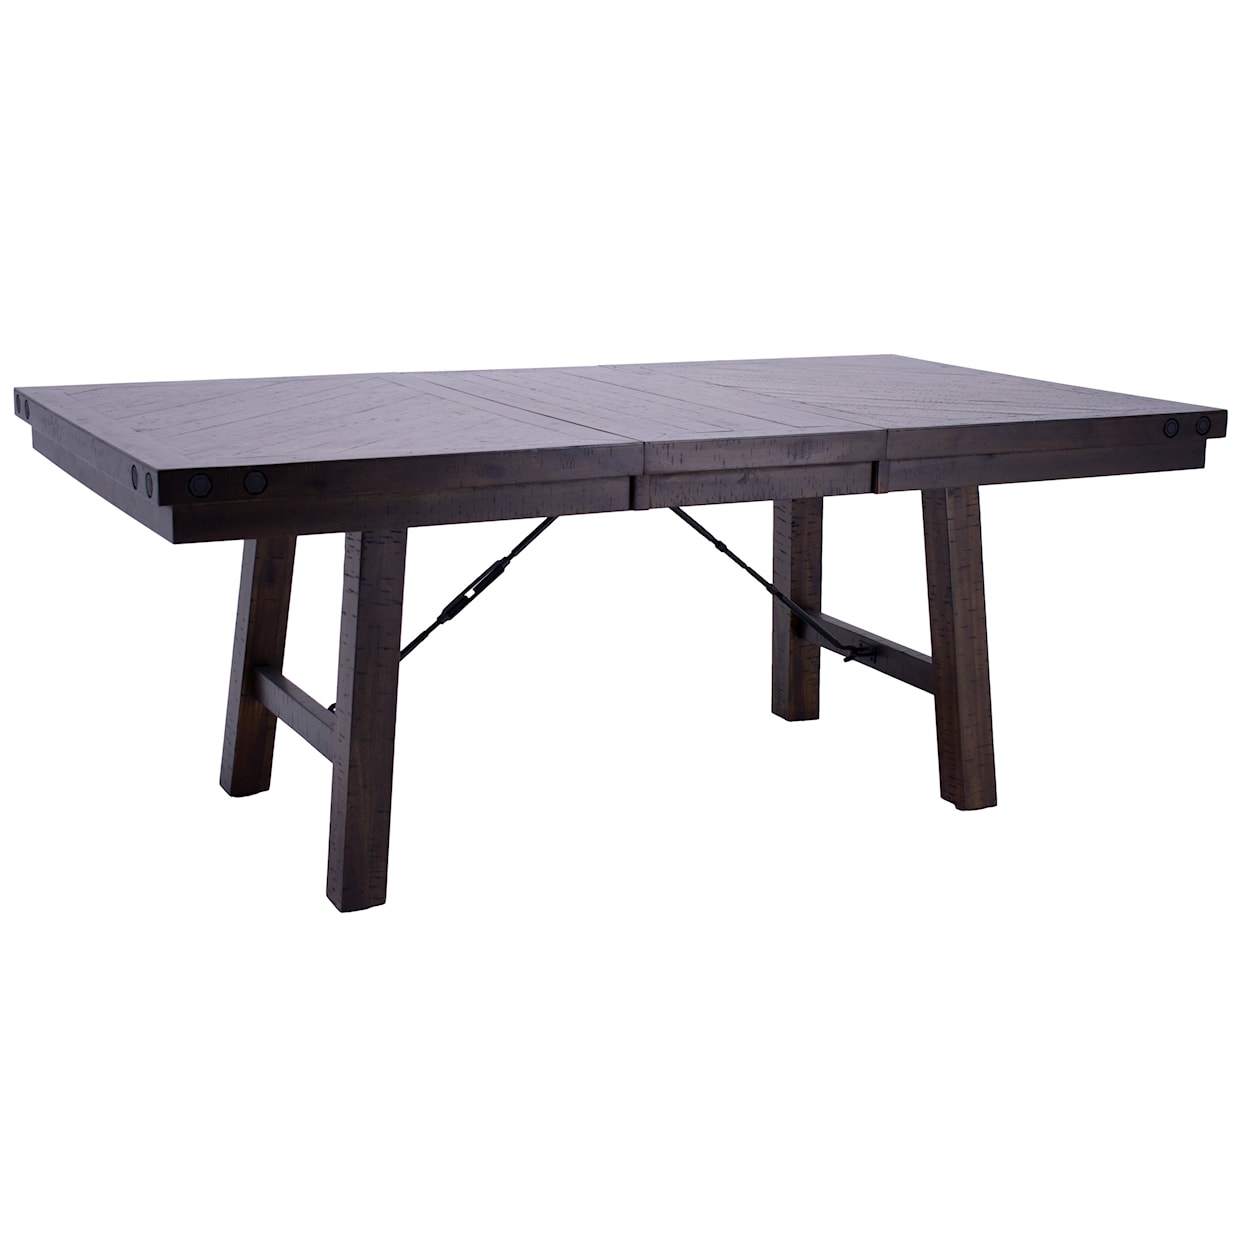 JB Home Ivy Ivy Dining Table, Chairs & Bench